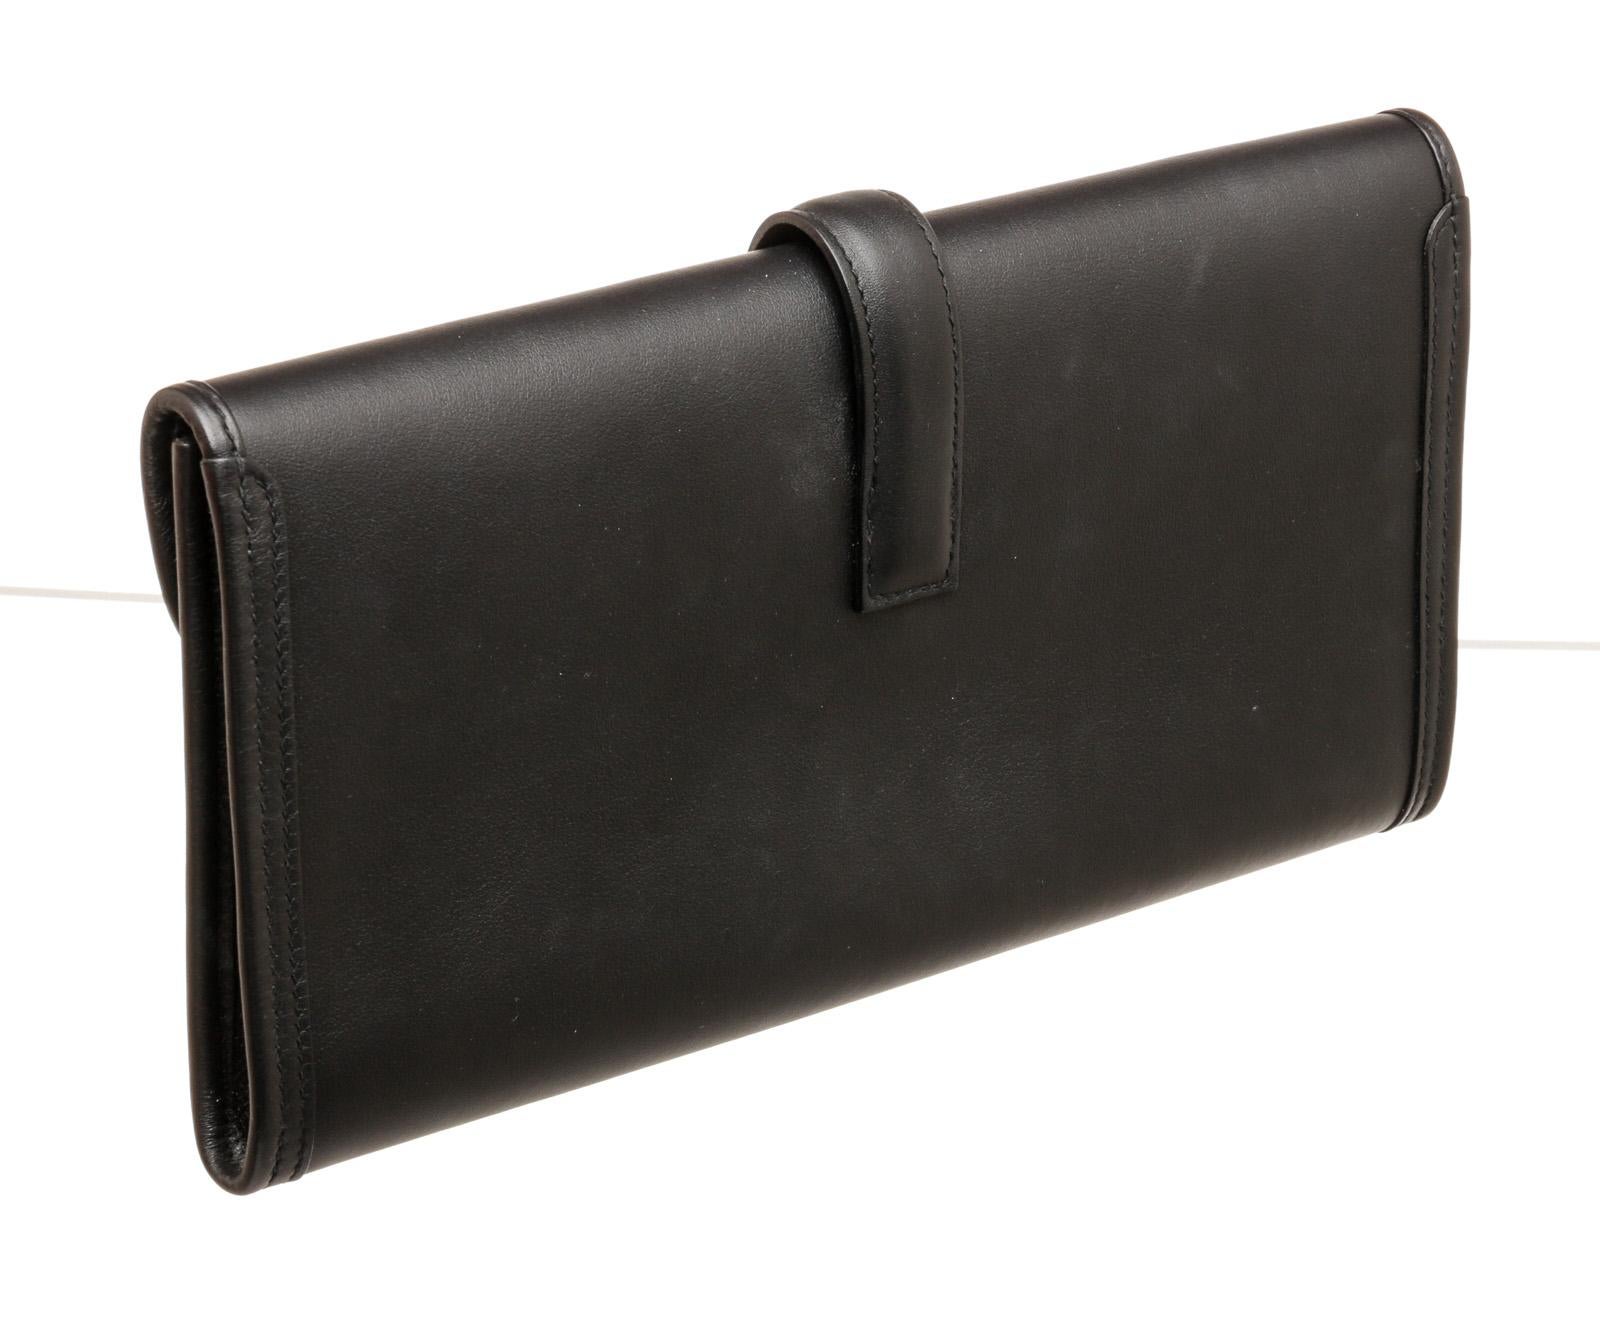 Hermes Noir Black Swift Leather Jige 29cm Clutch In Excellent Condition For Sale In Corona Del Mar, CA